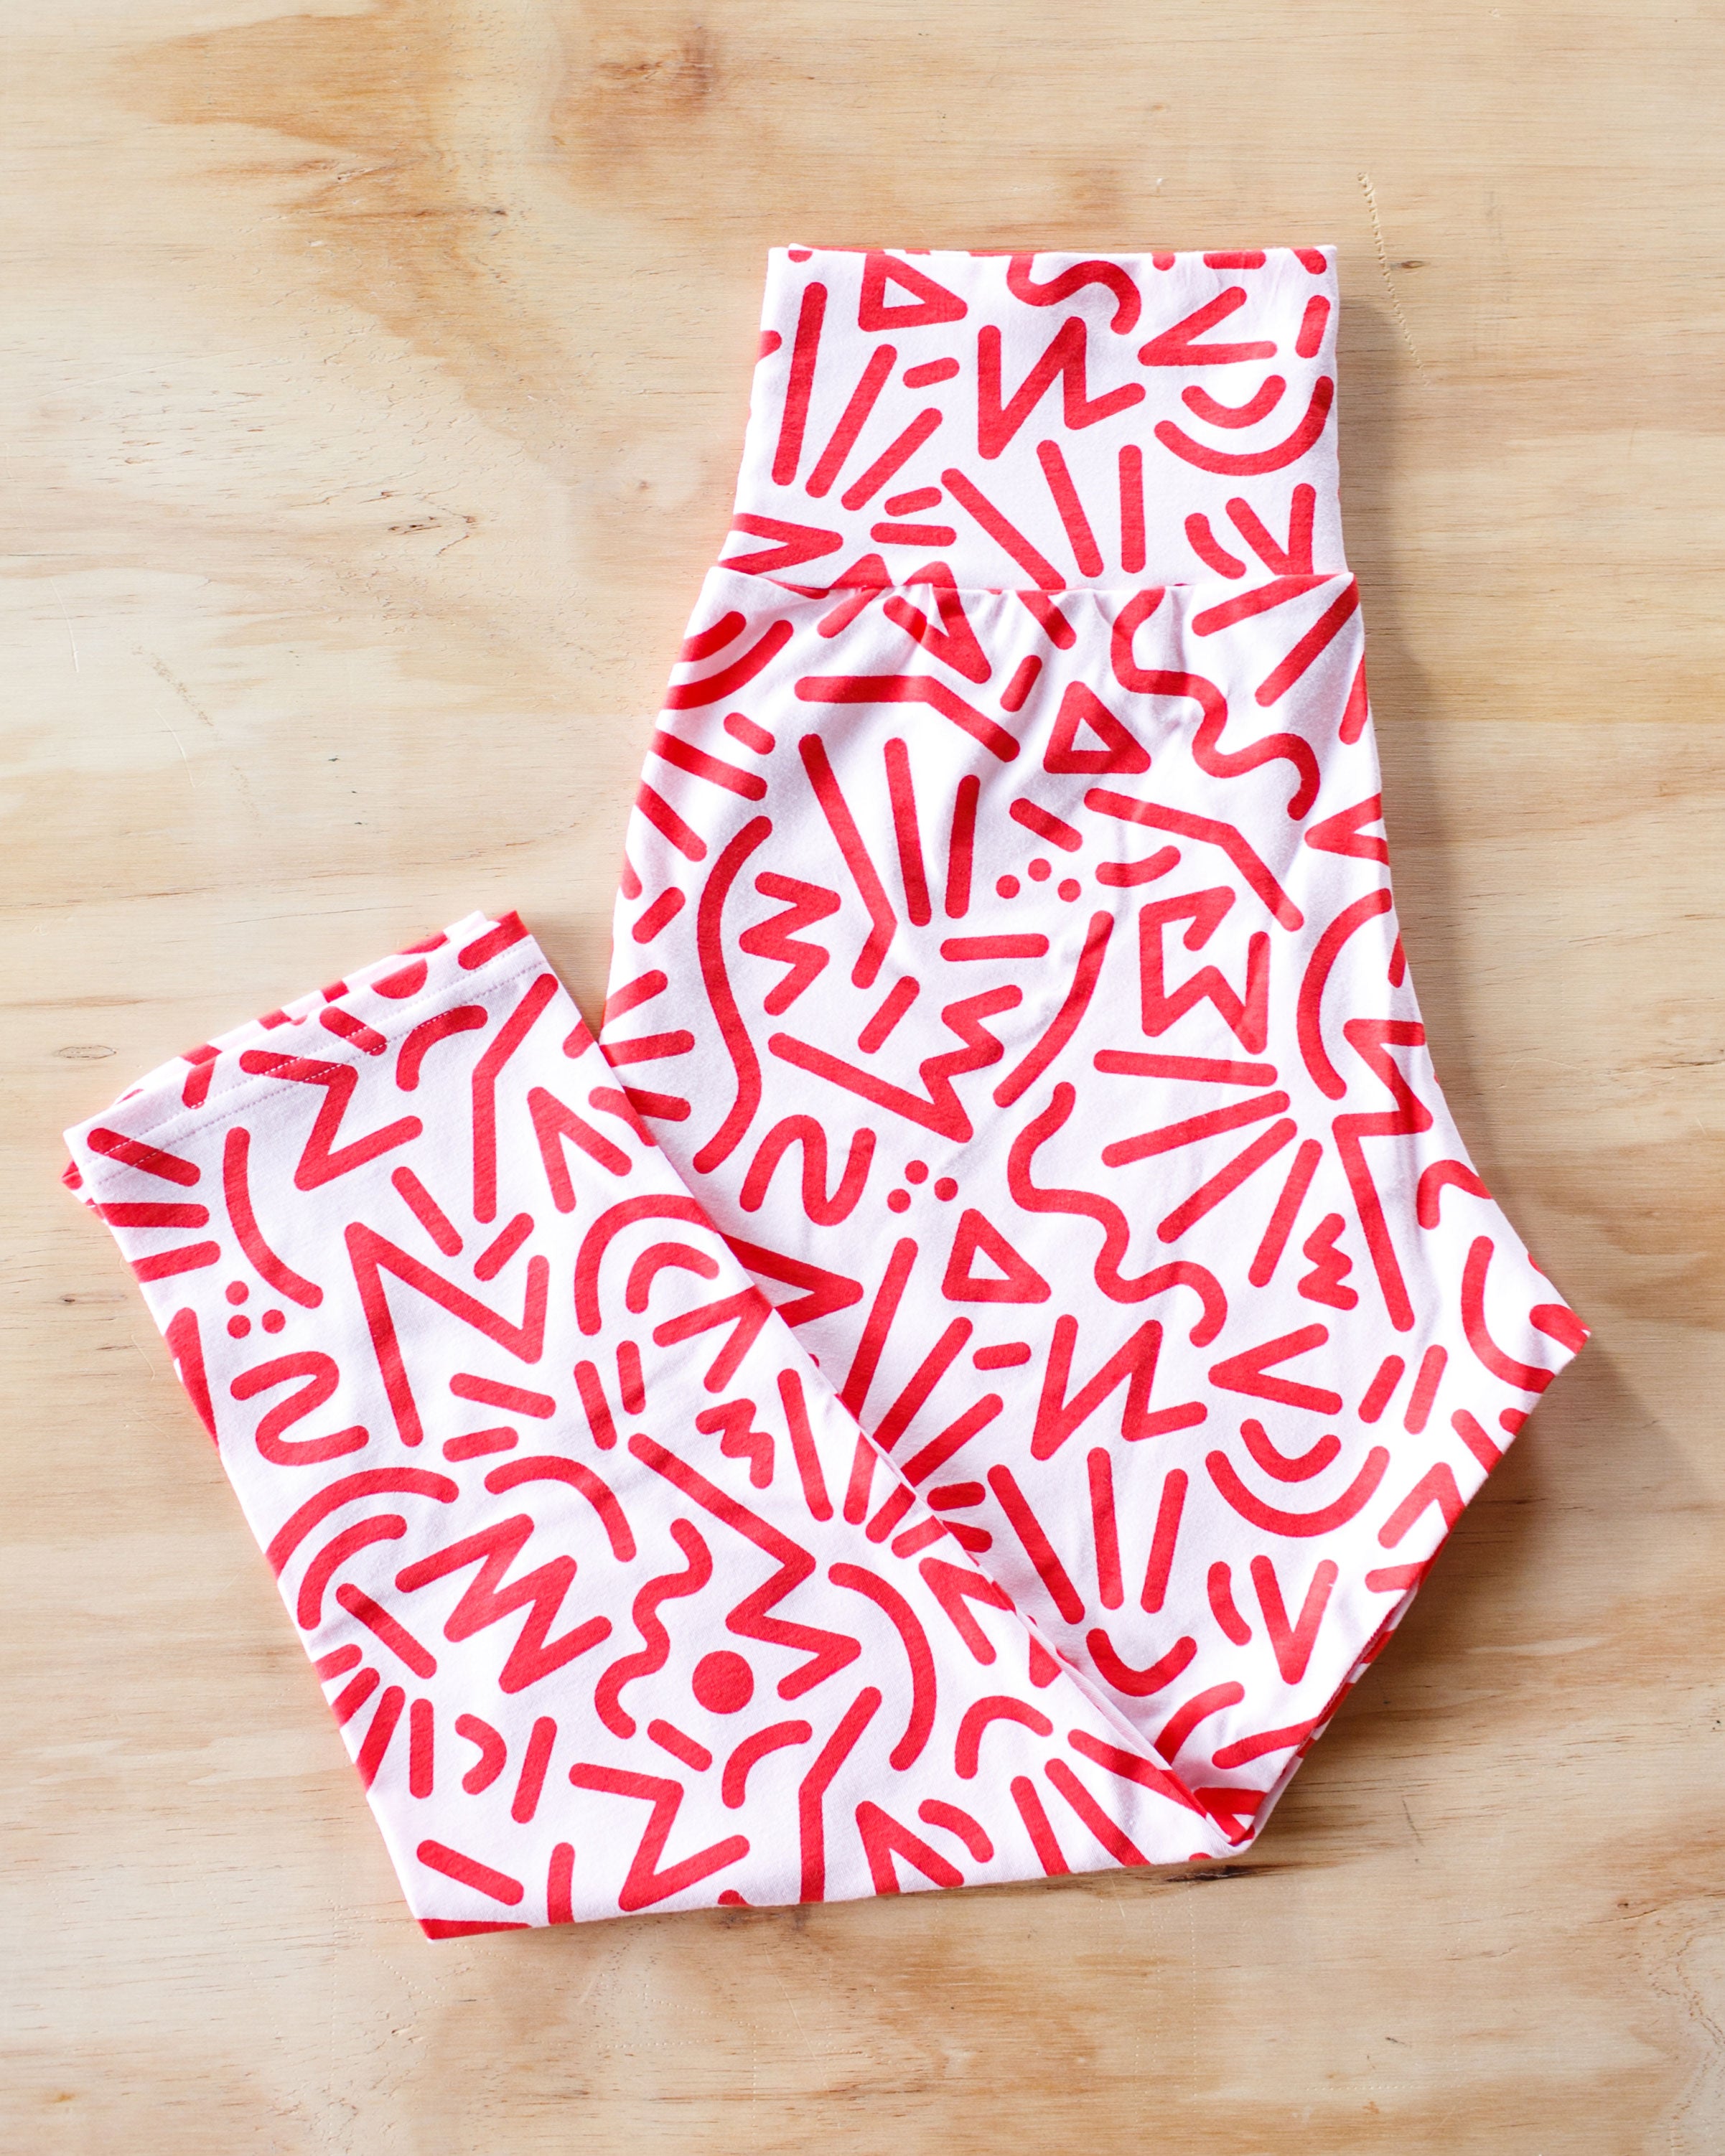 Flat lay of Thunderpants organic cotton 3/4 Leggings in our Energy Vibes print: Perfect Pink with dark pink squiggles.